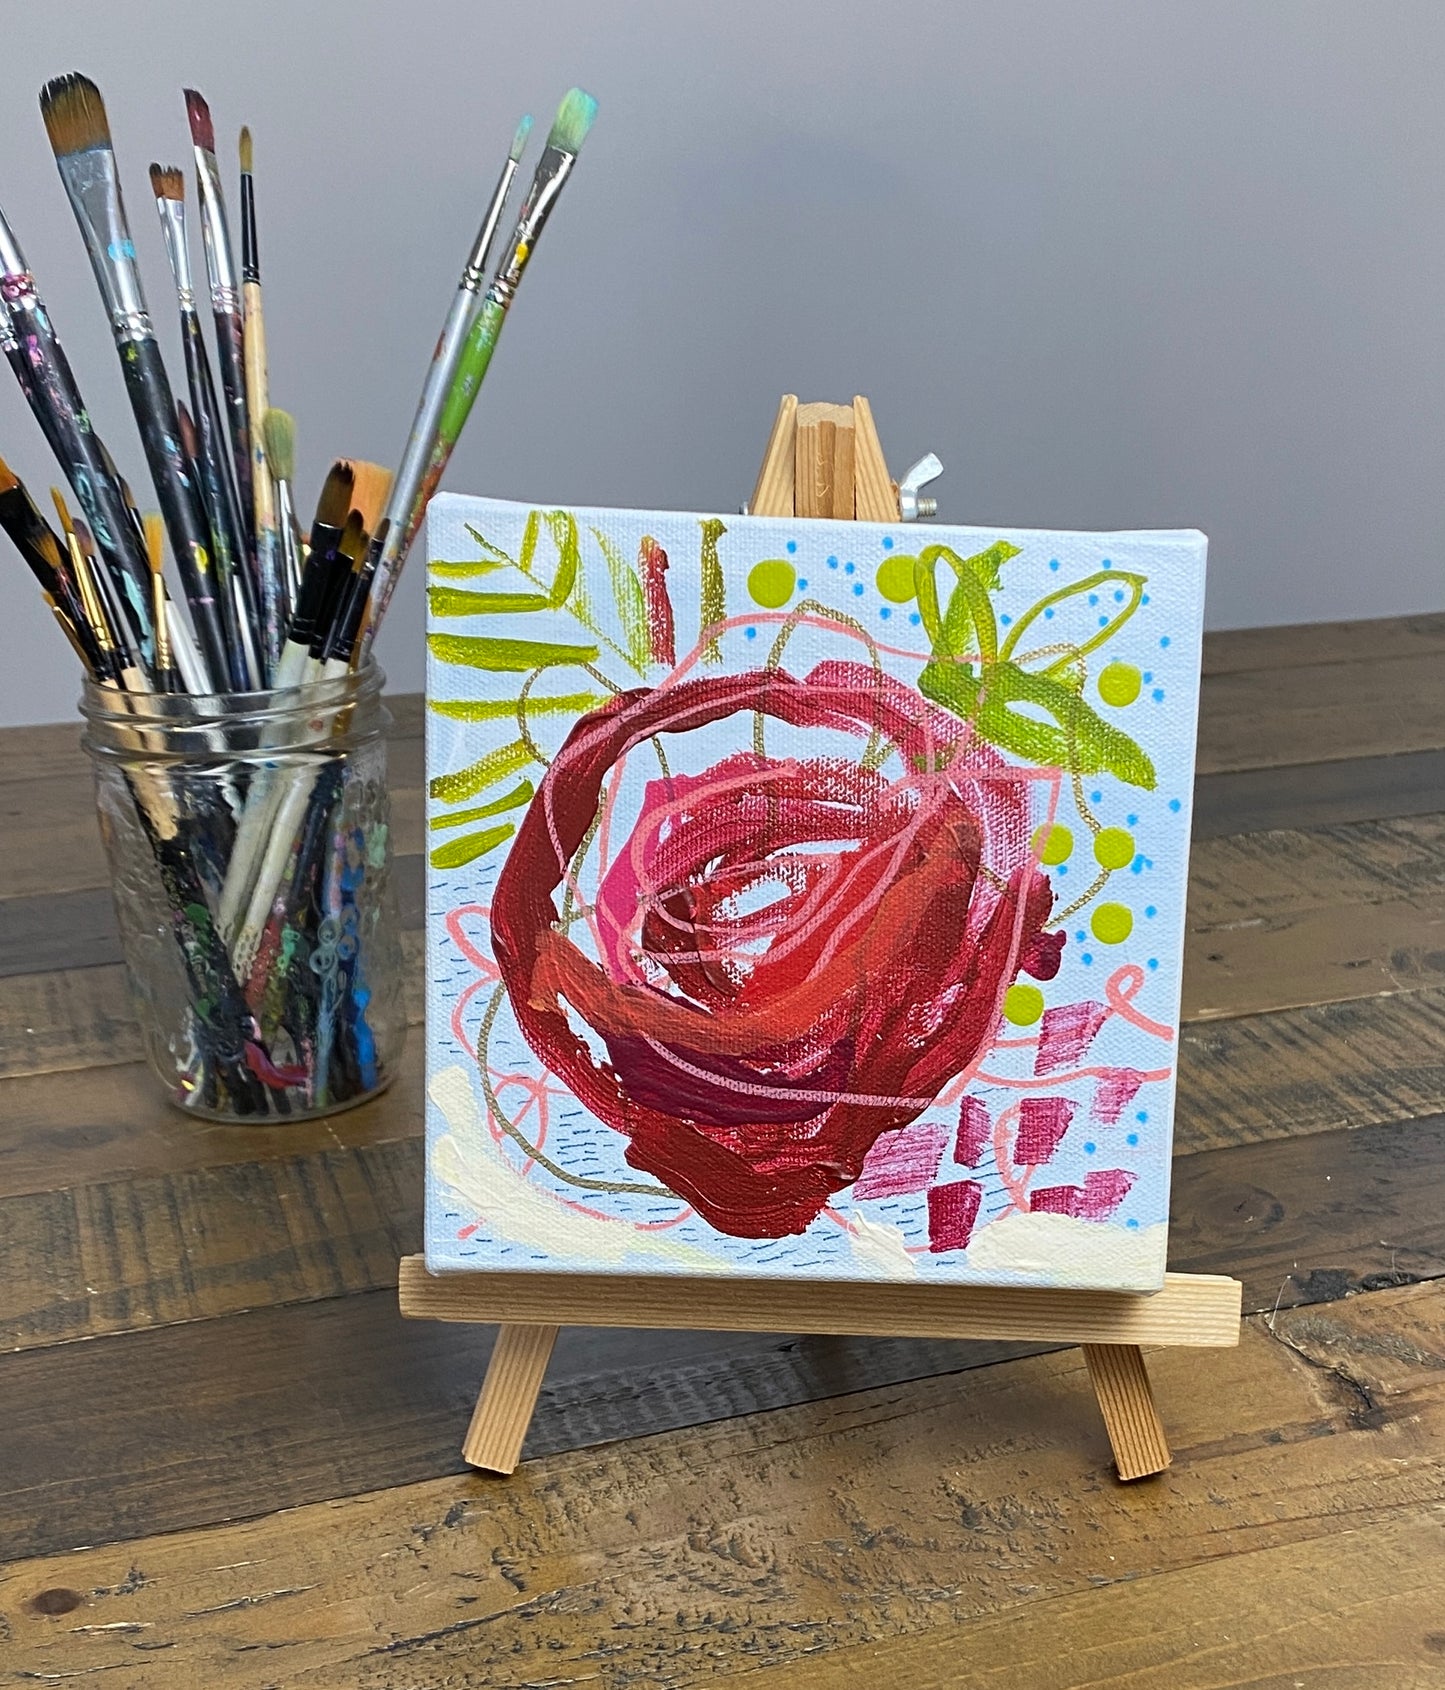 Rose 6”x6” inches on Canvas / Red and Pink Botanical Mini